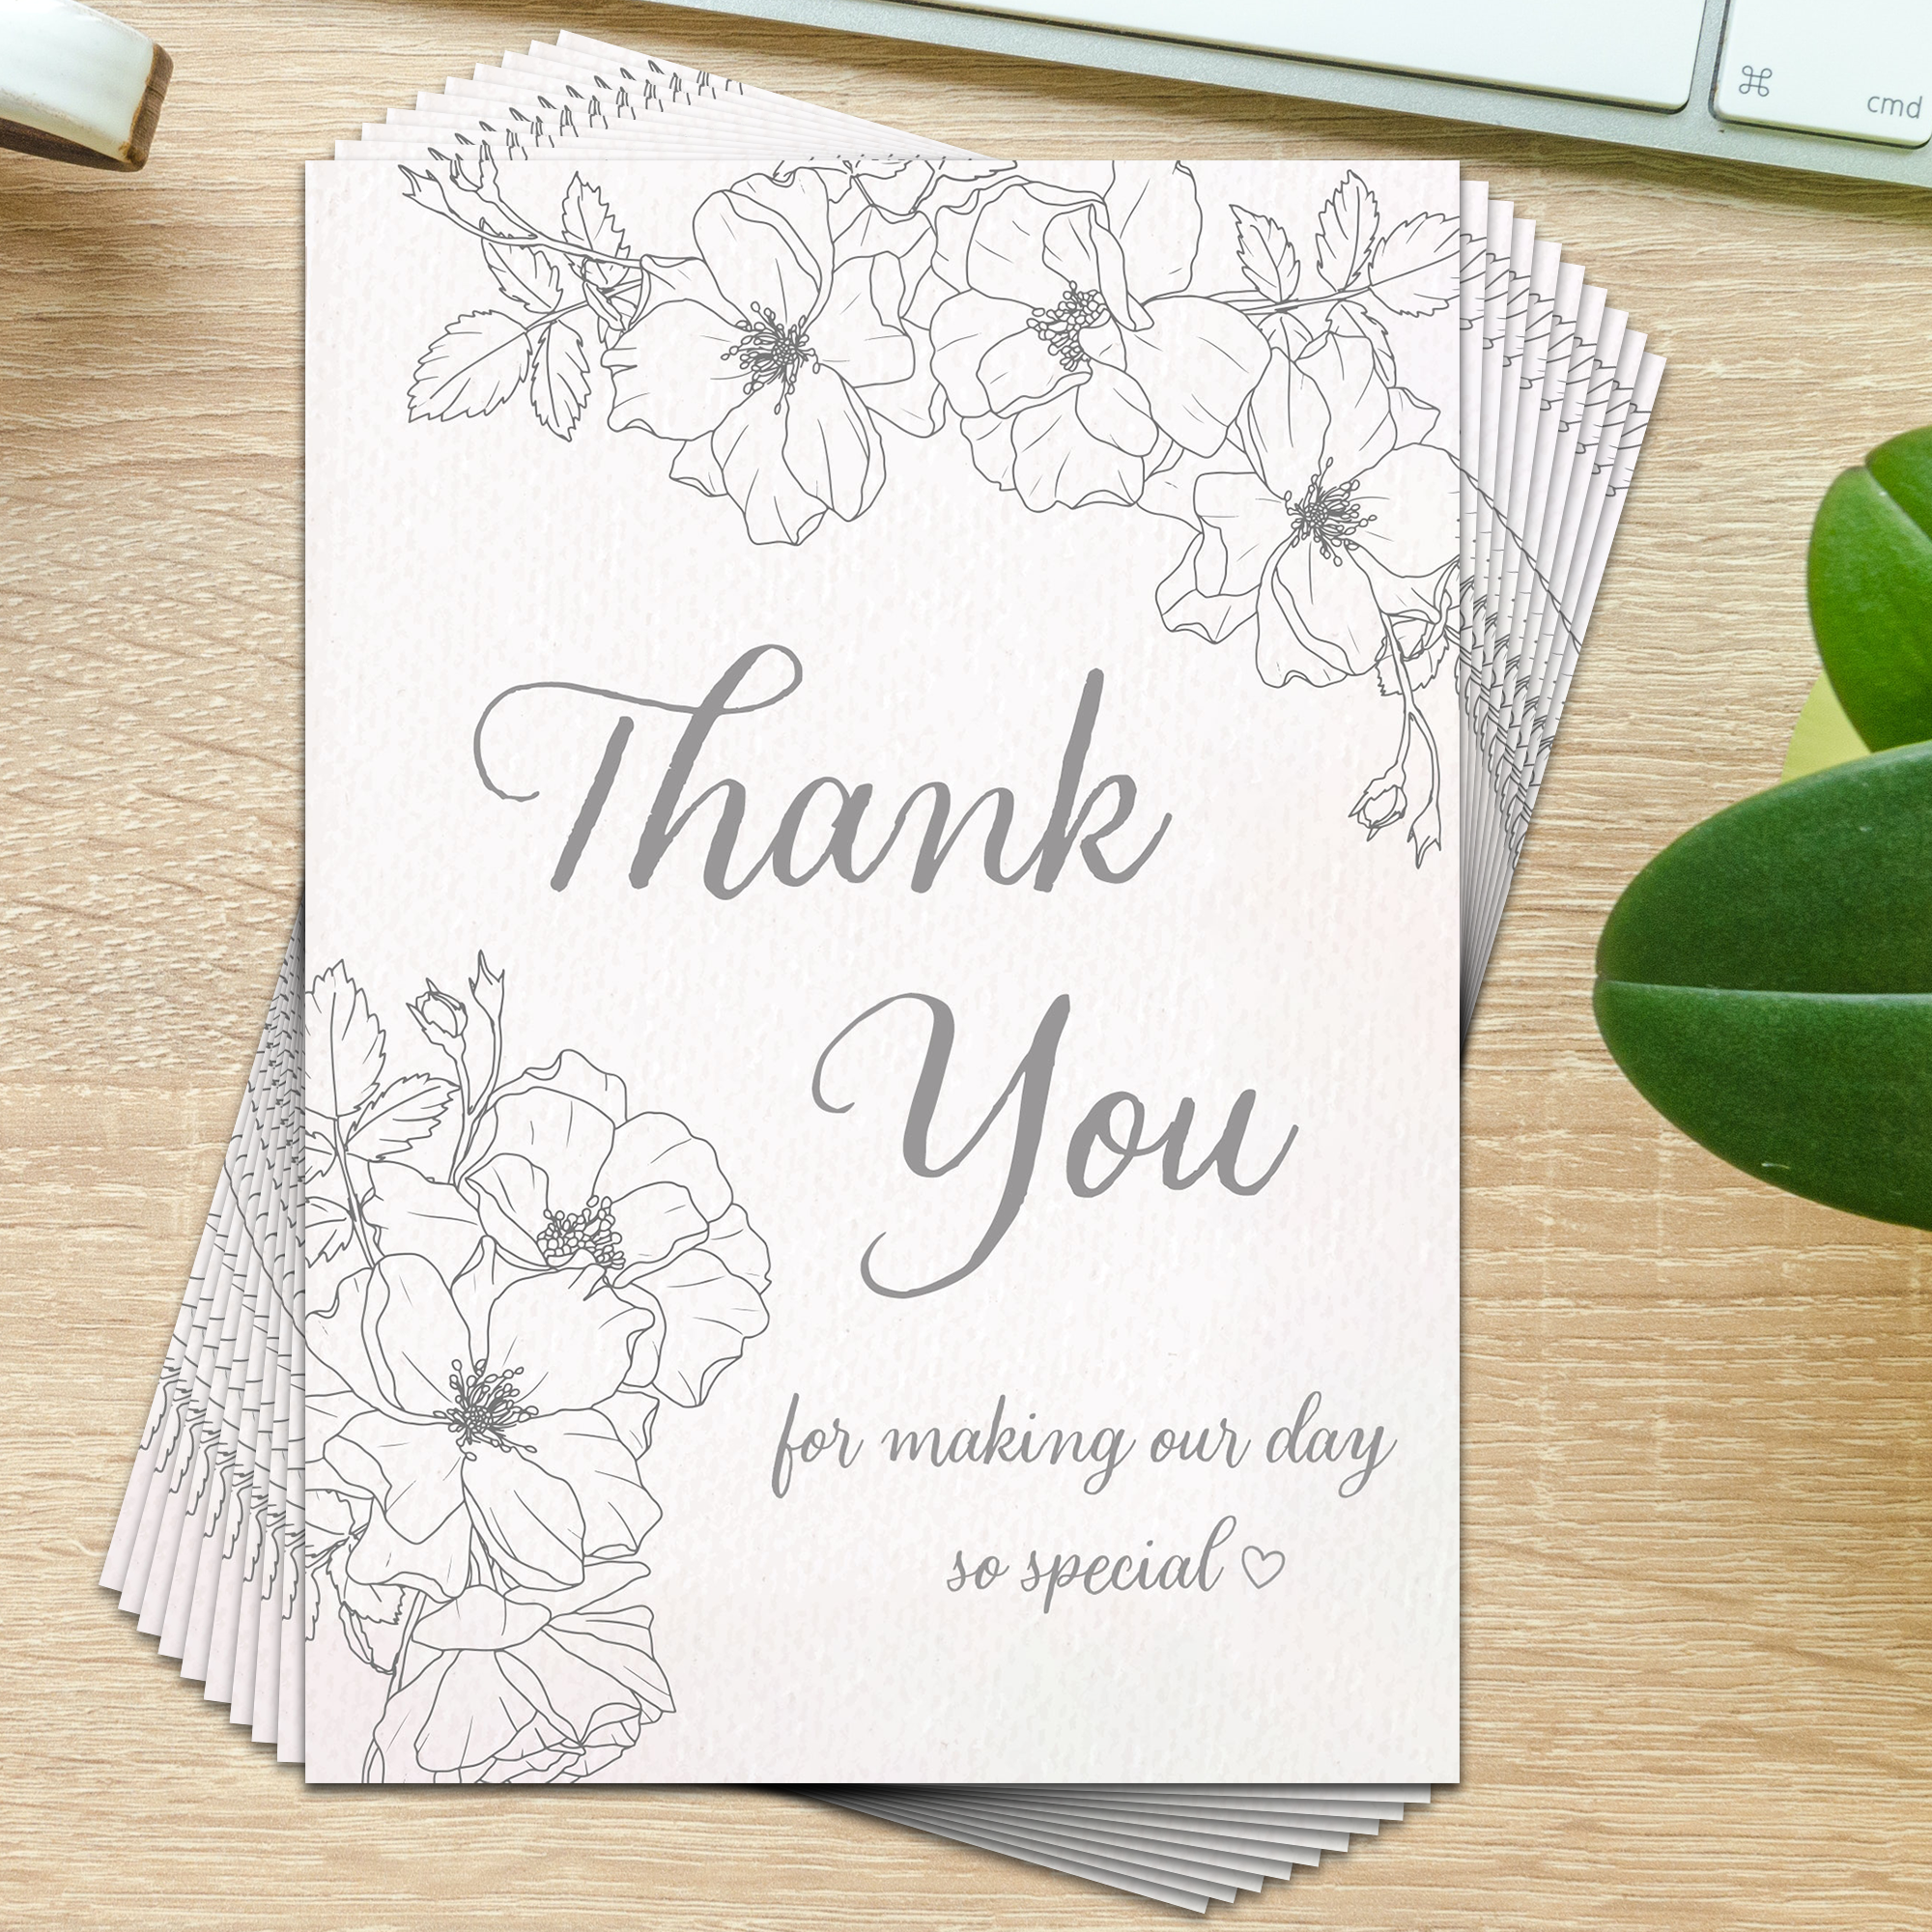 Thank You for Making Our Day so Special Wedding Card (Portrait) - Pack of 10